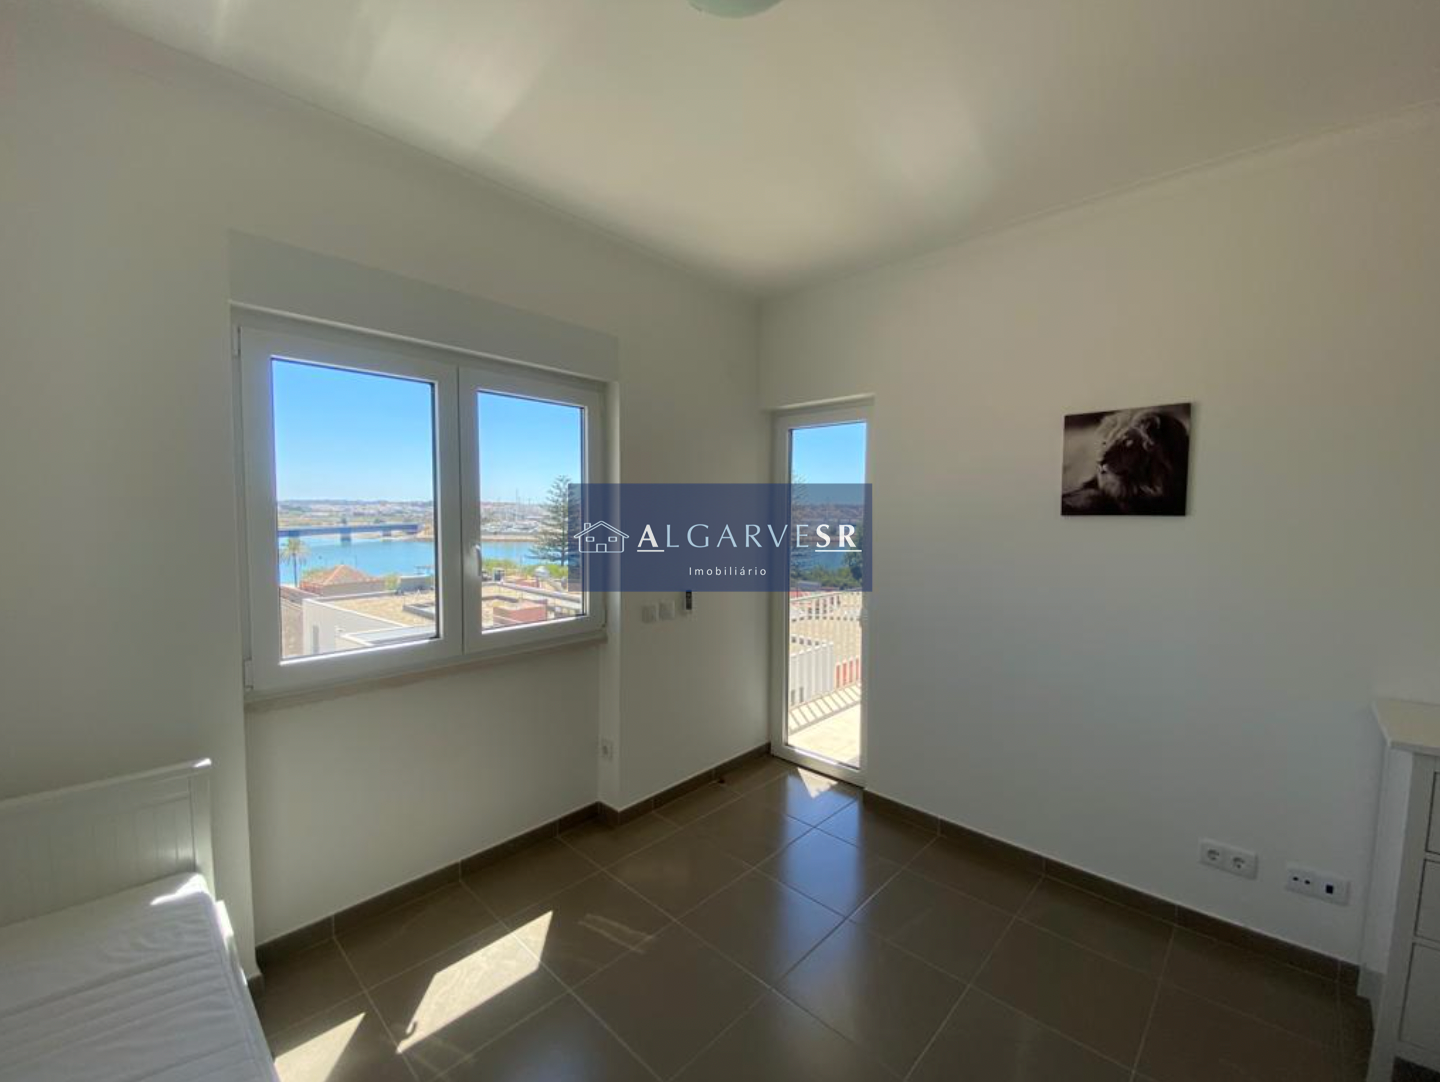 Spectacular 2 bedroom apartment with Portimao river view